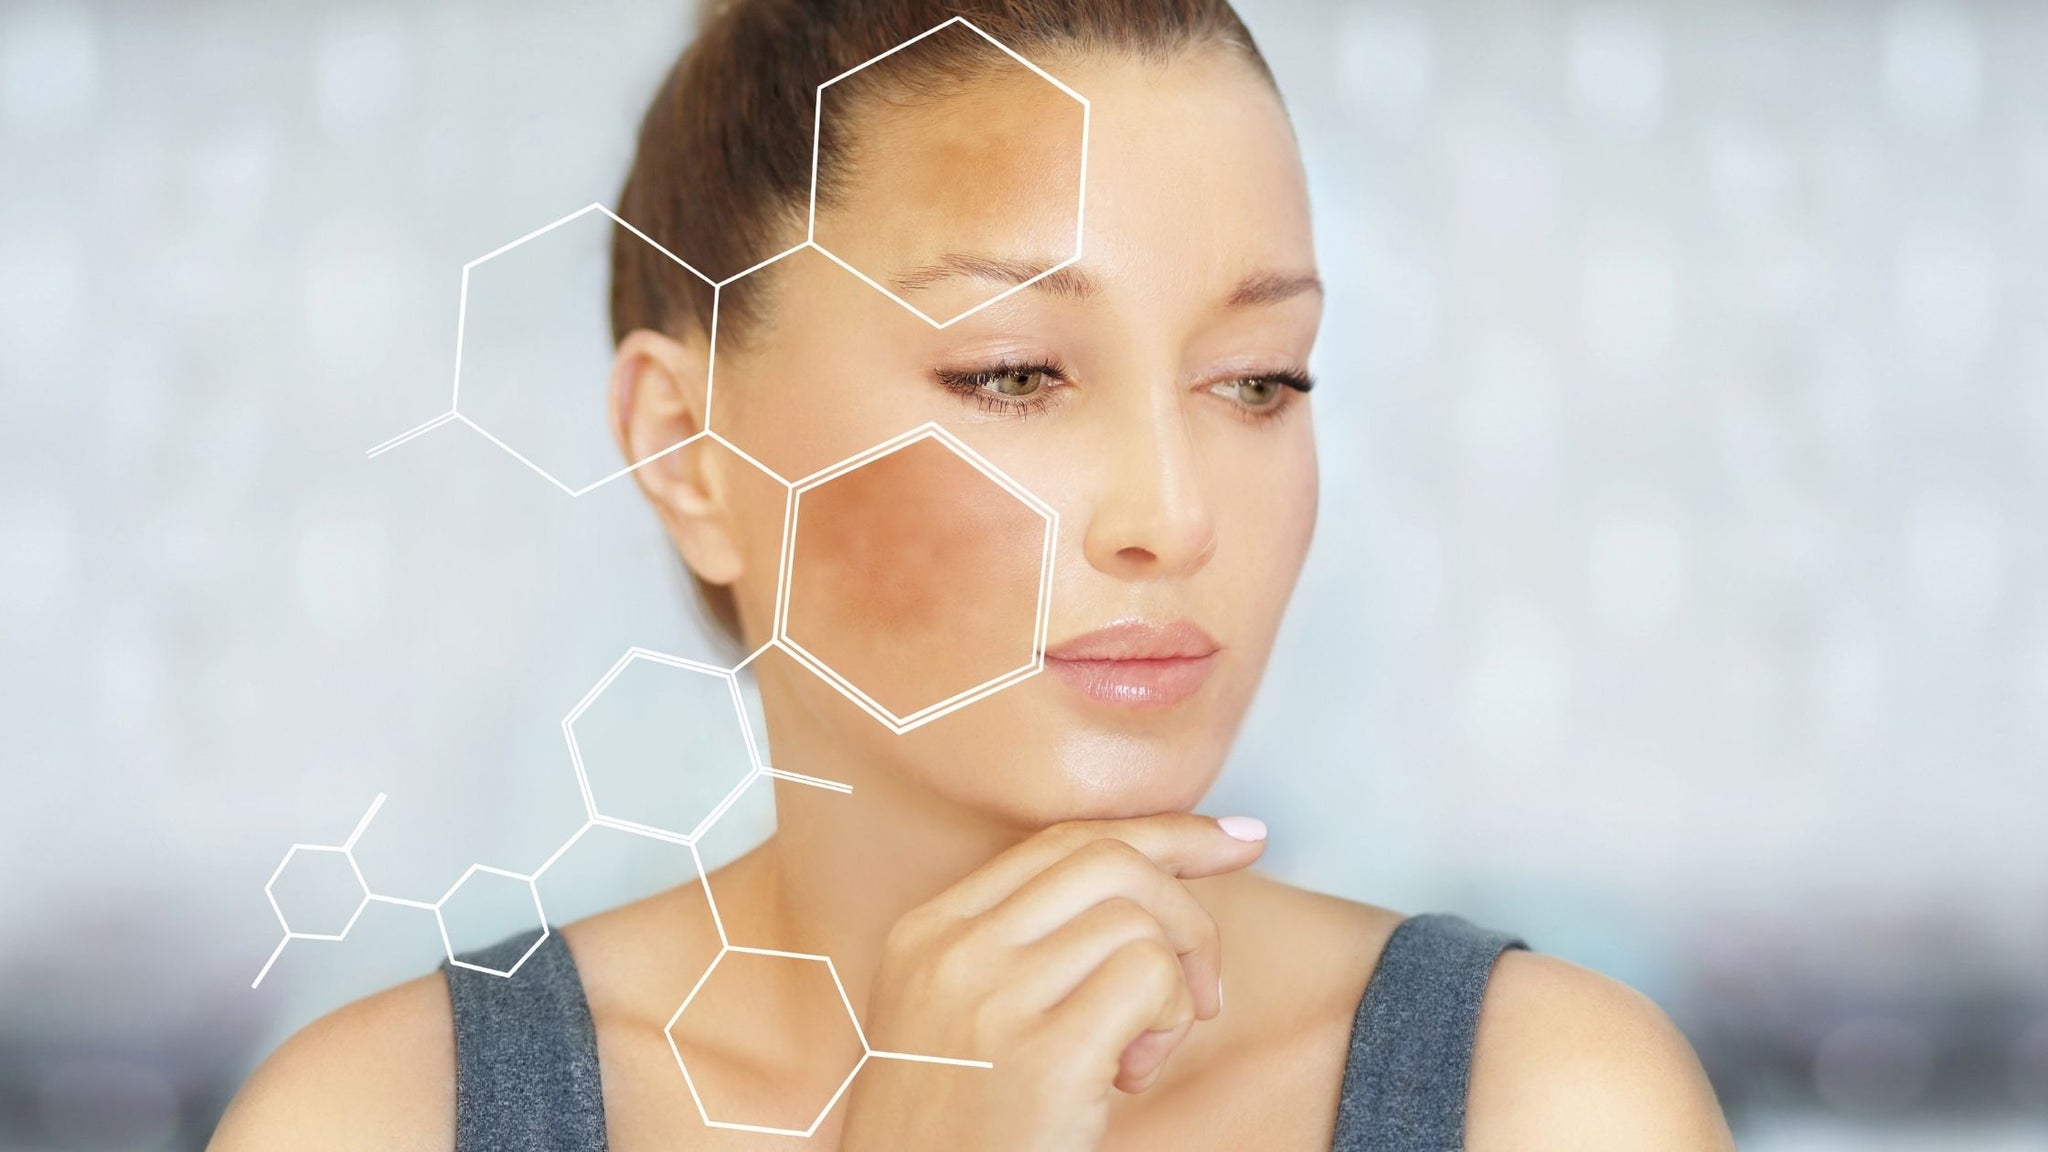 What is Melasma and how to treat it?